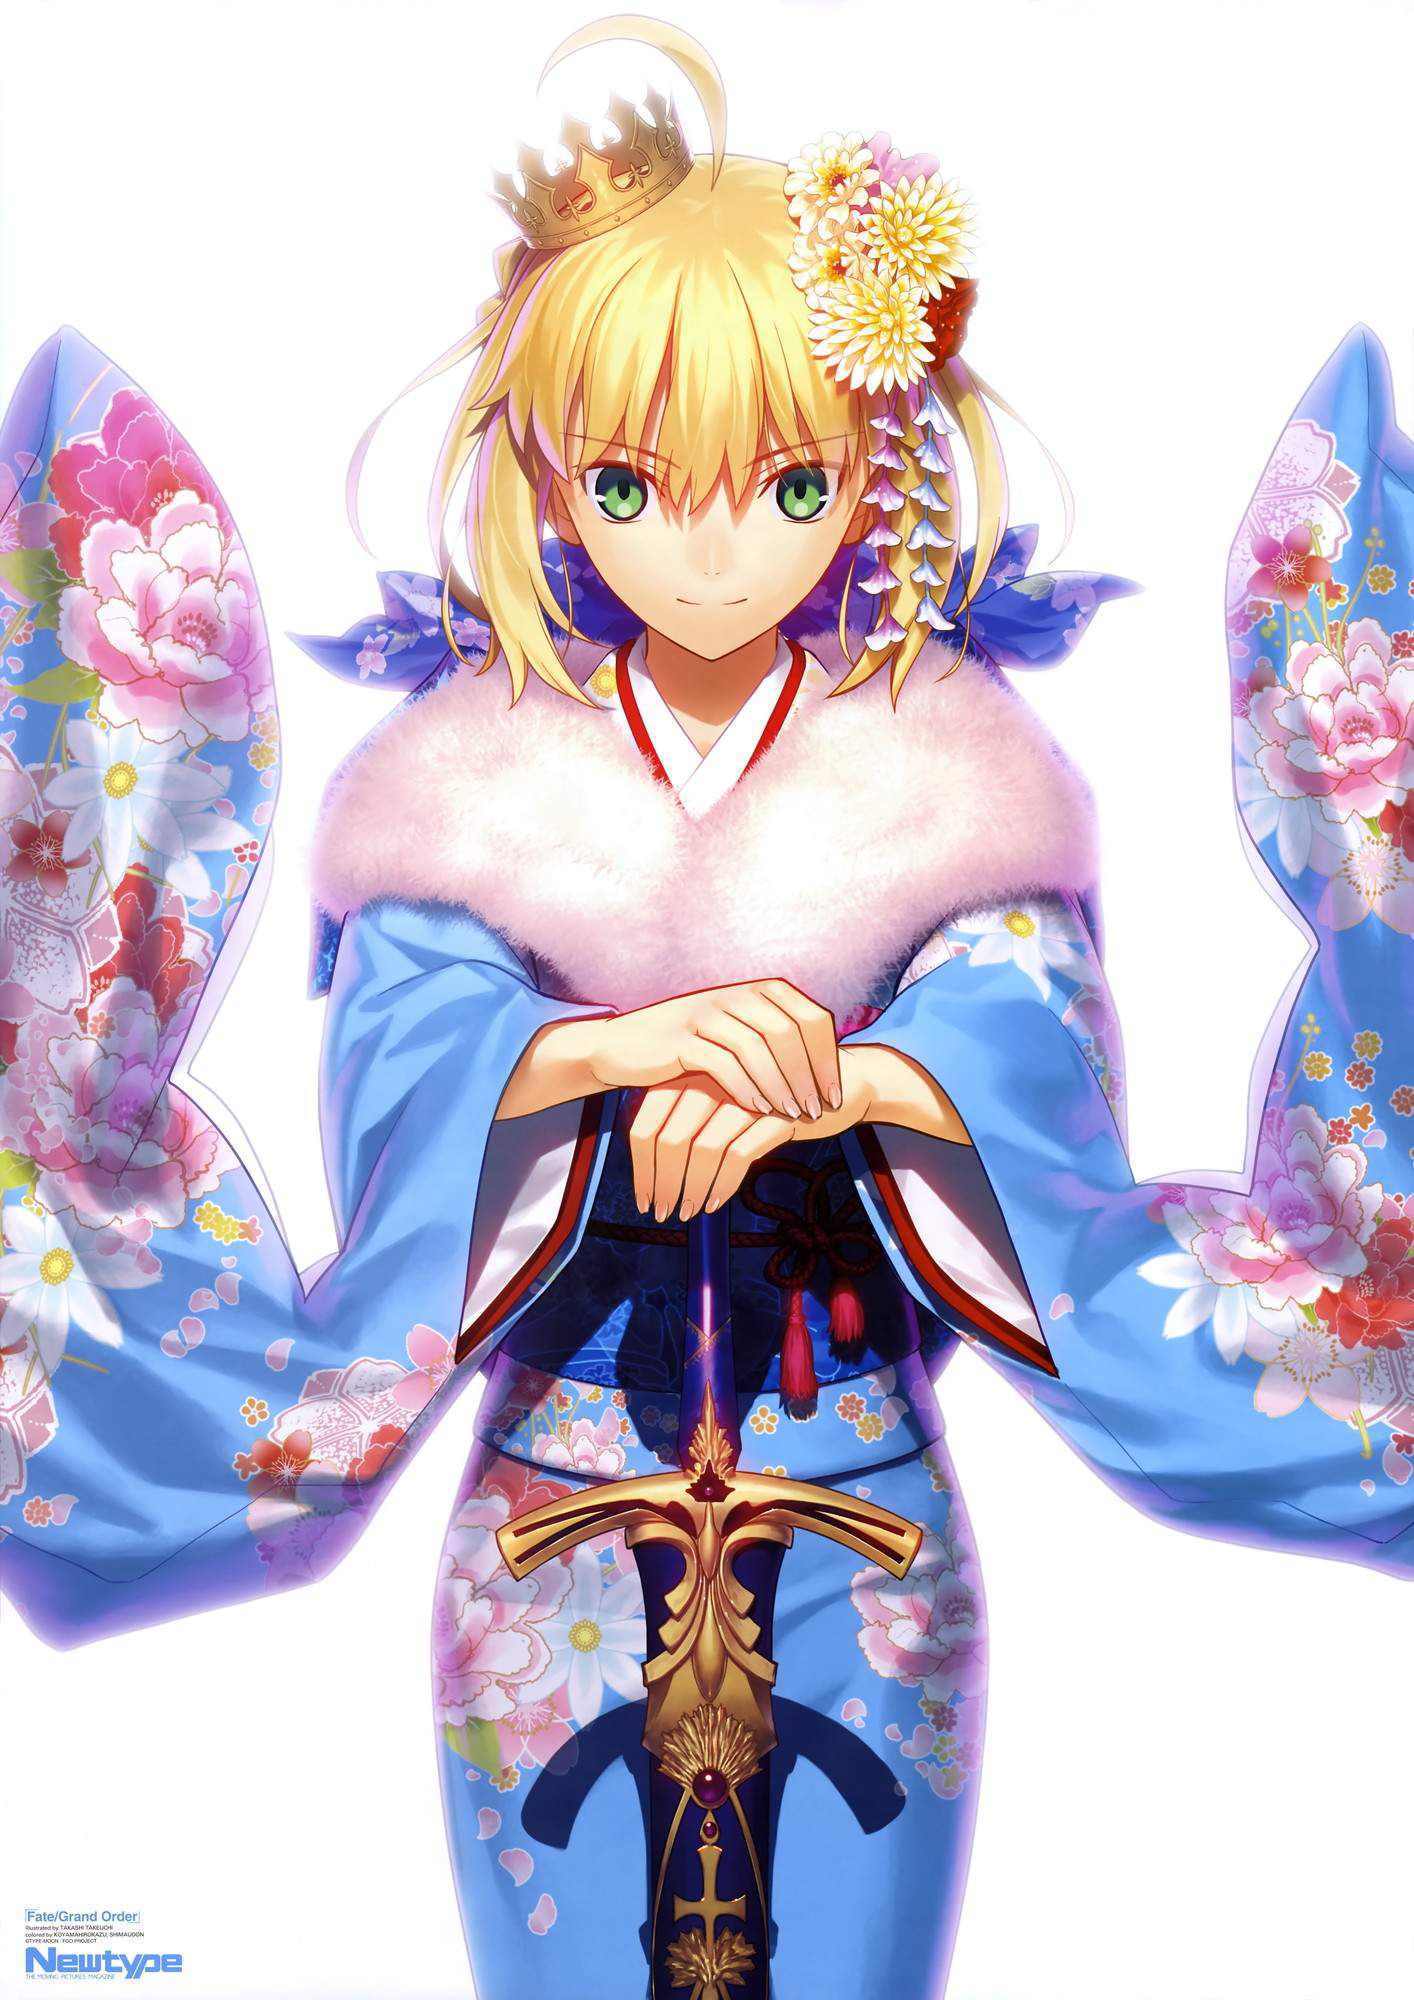 [Fate/staynight] it increases London? Saber (Altria Pendragon) MoE erotic images ☆ (8) [Fate/GrandOrder] 43